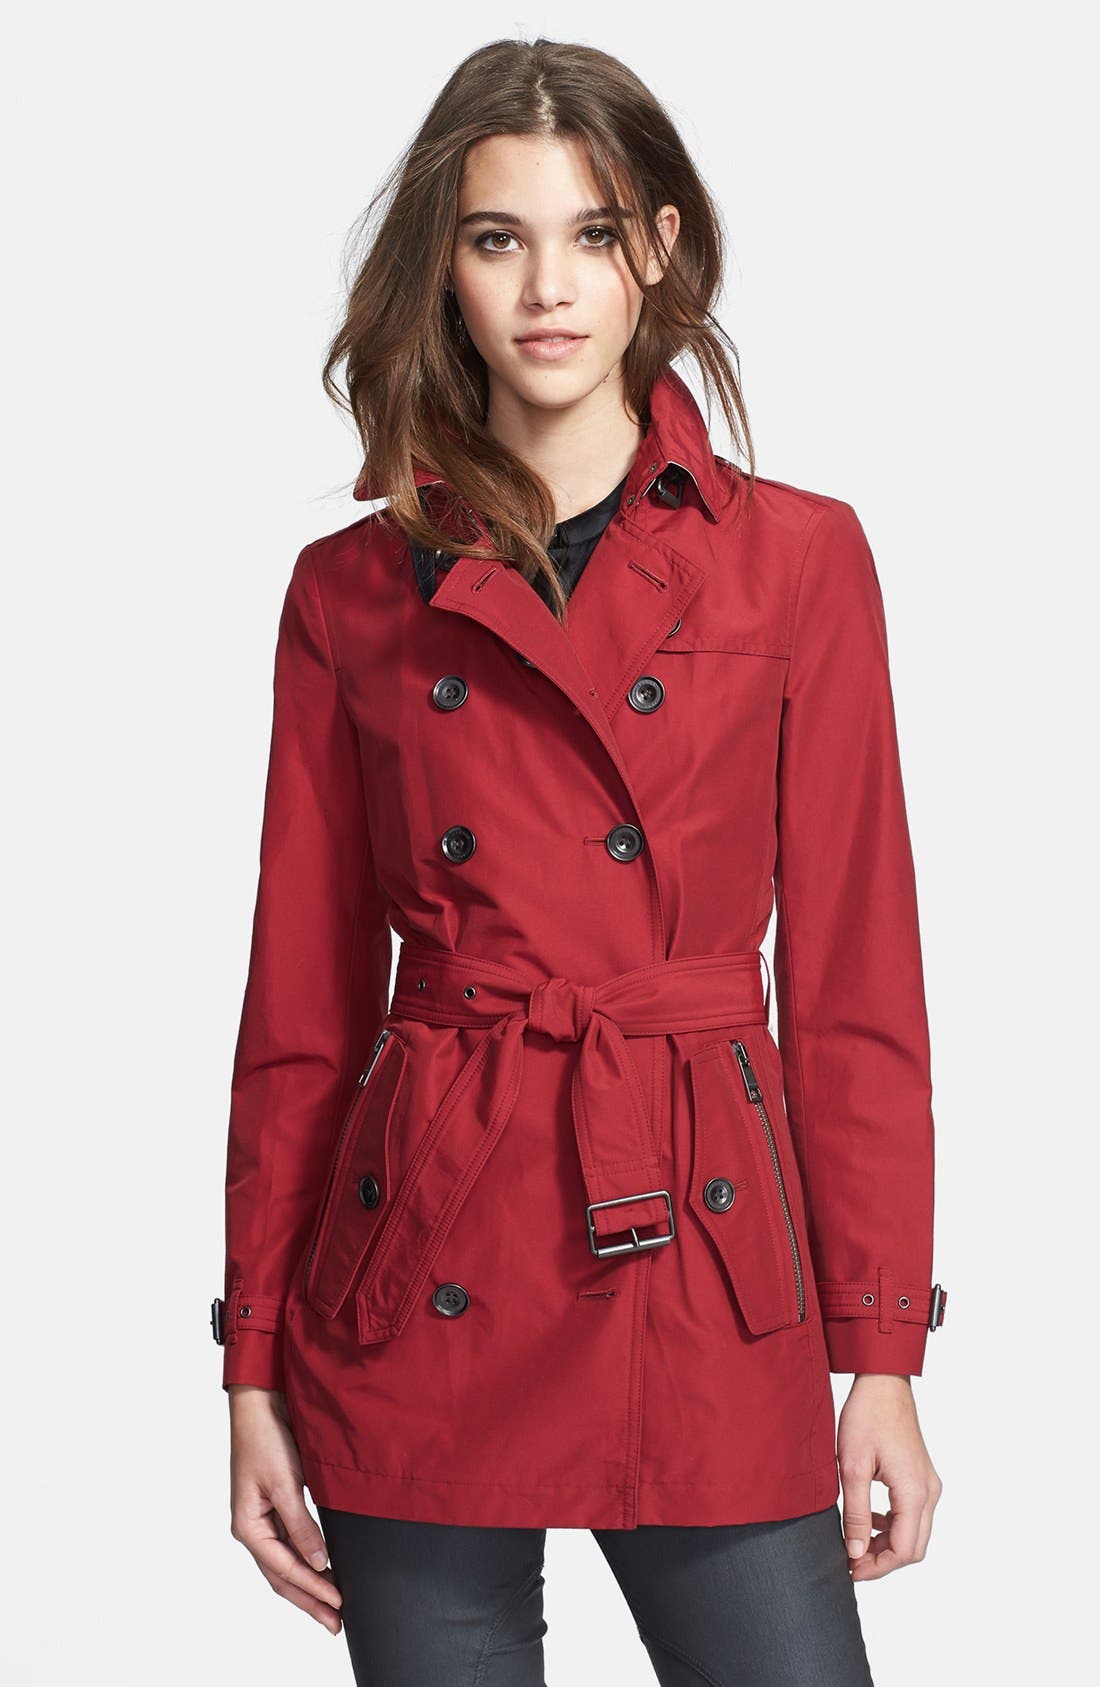 nordstrom burberry trench